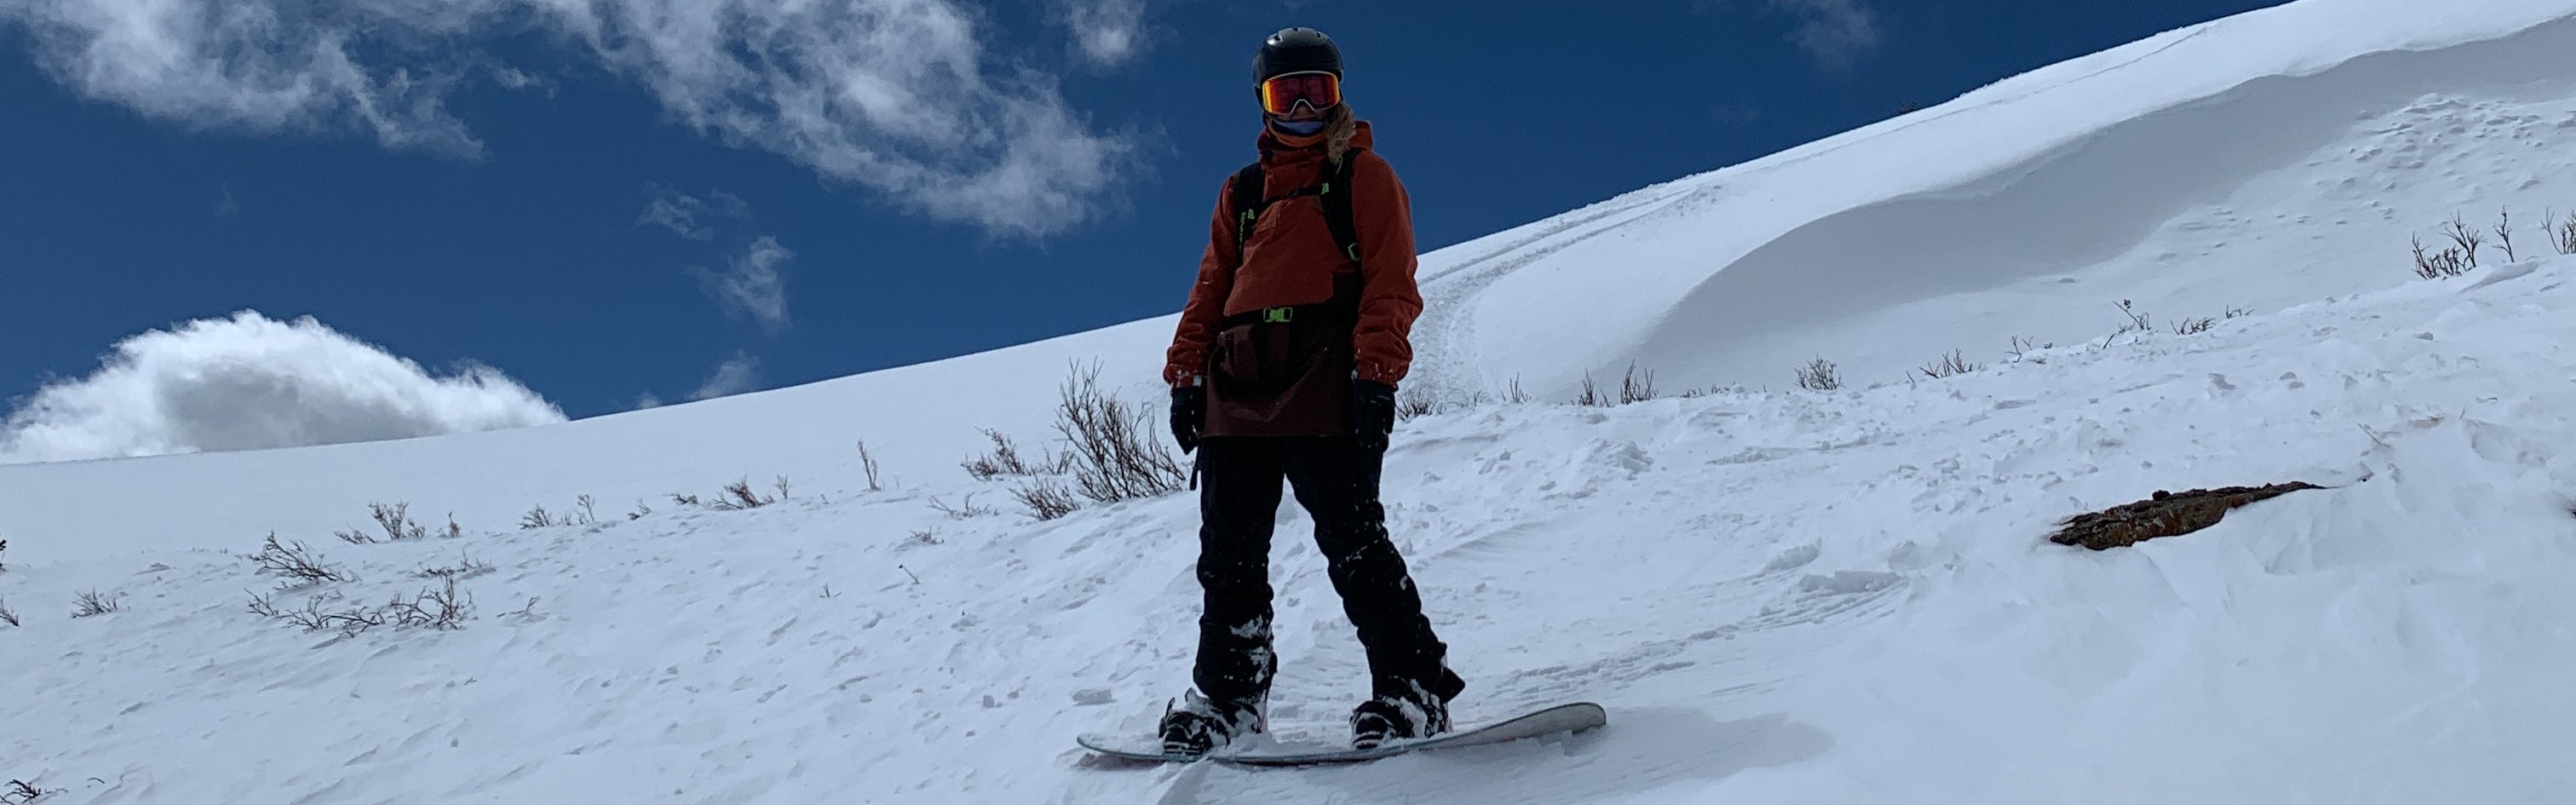 A woman on a snowboard stands perpendicular to the snowy slope she's on. The sky behind her is a dark blue.